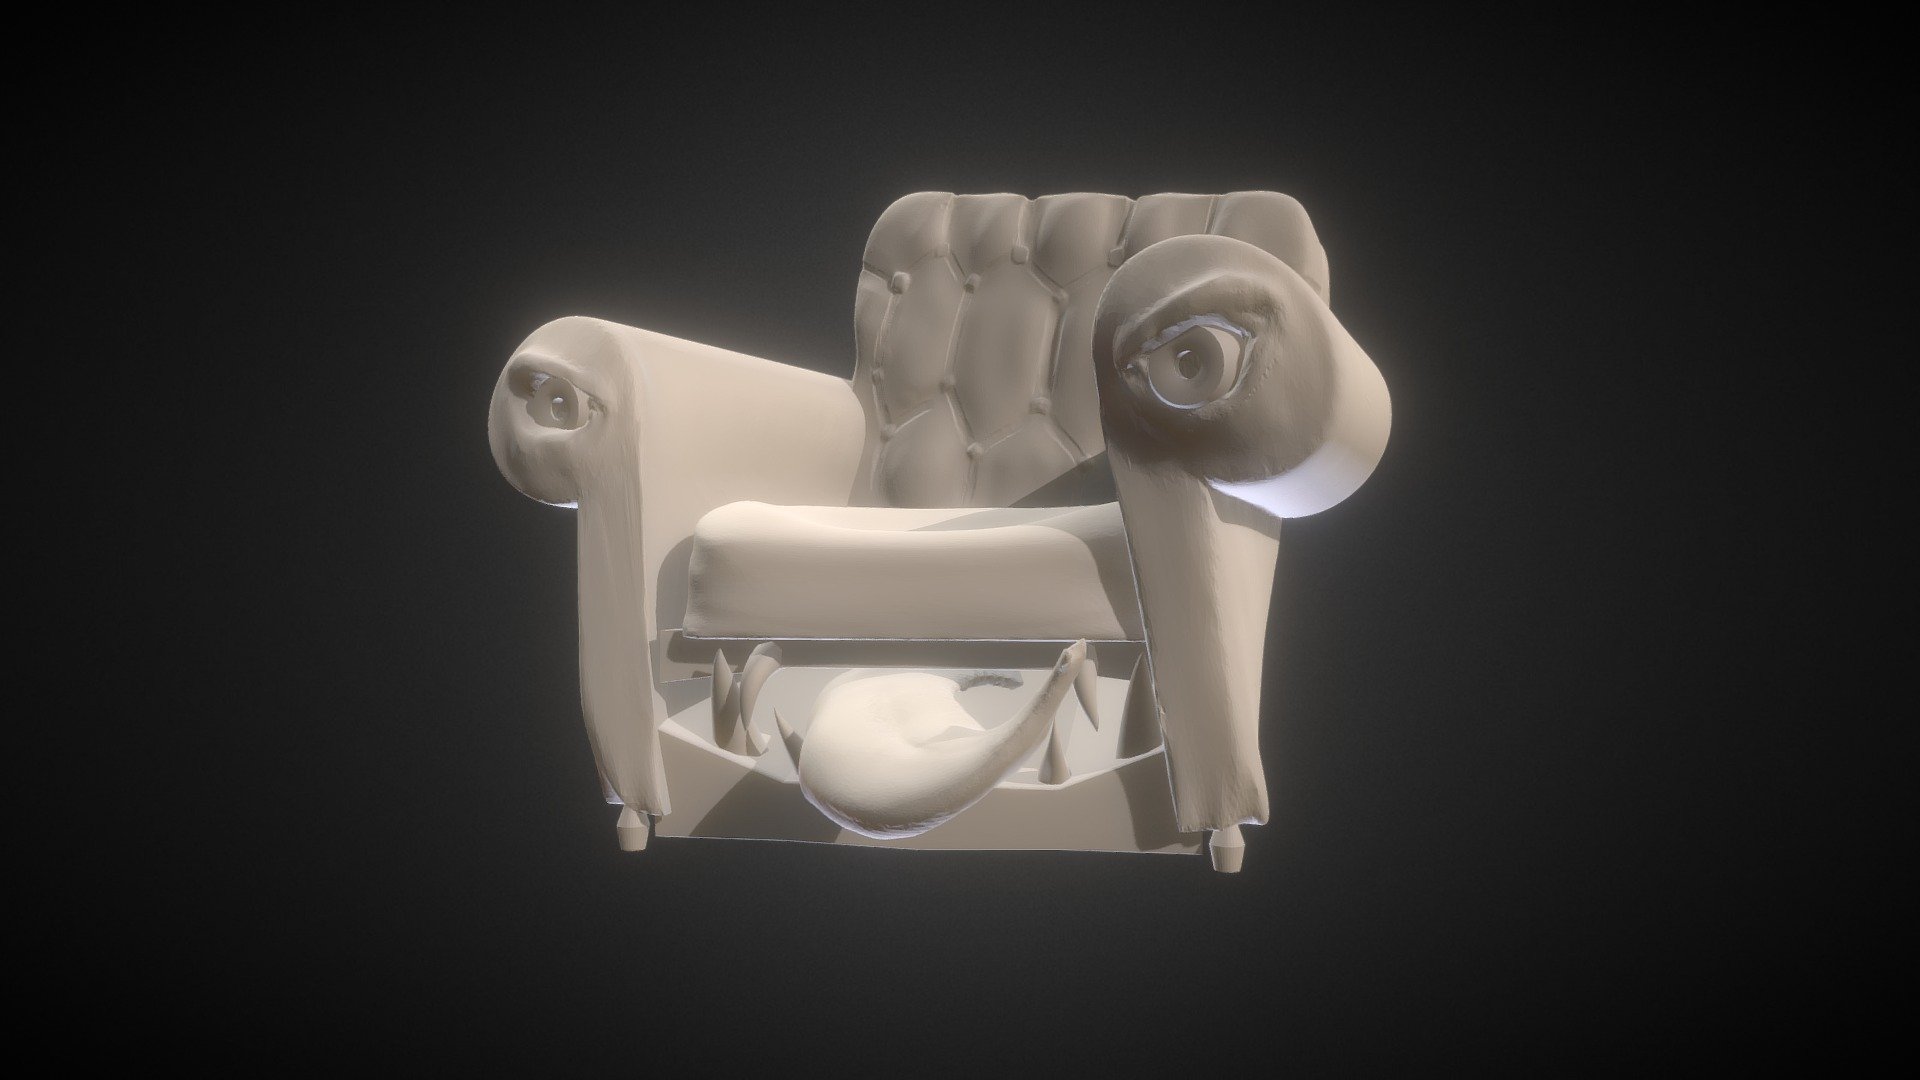 Sculptjanuary Day 23: Furniture

This furniture belongs to someone who adores lively sittings.
The tongue is more sensitive than it looks 3d model